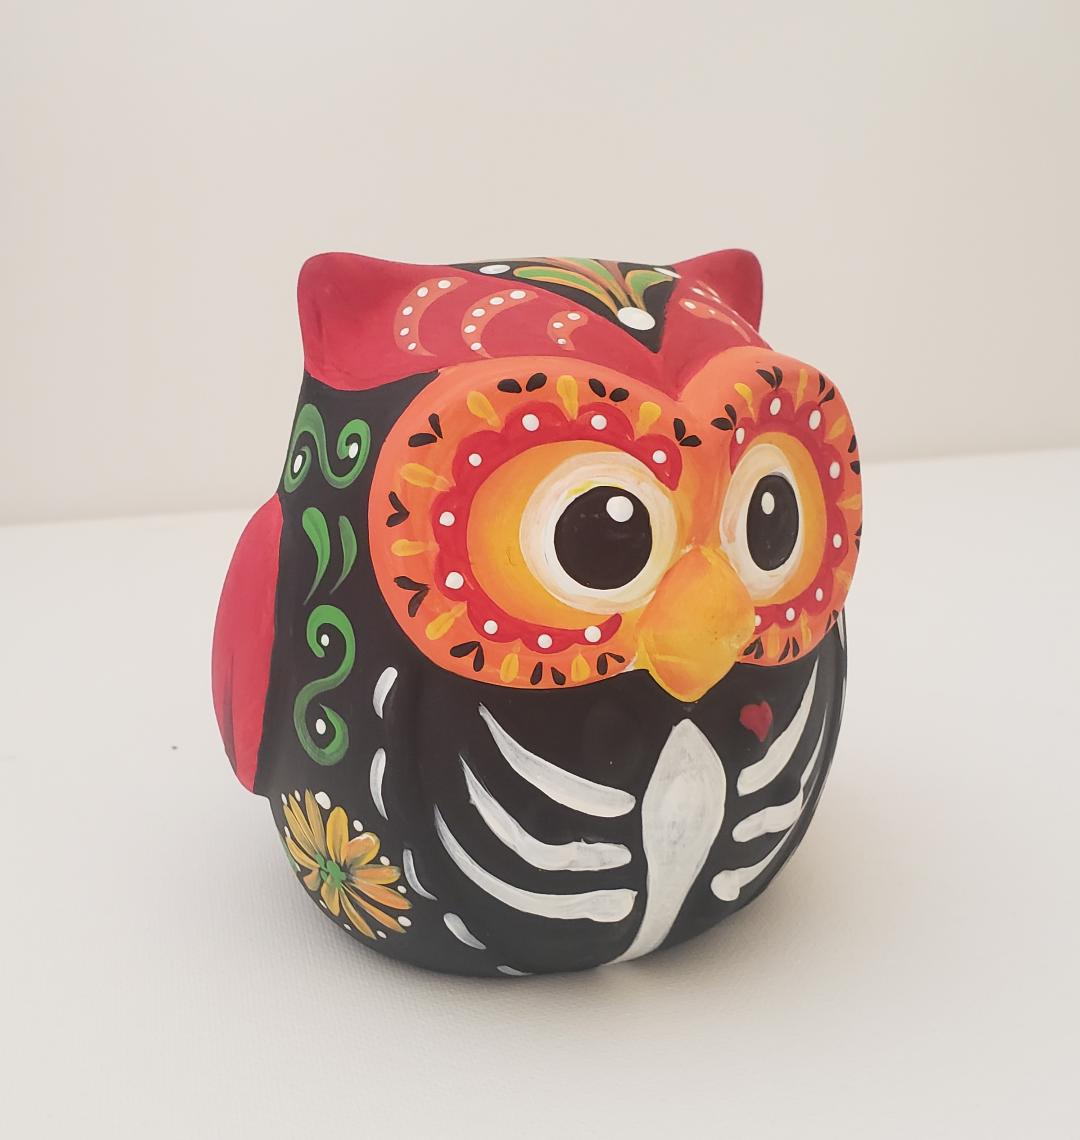 A Sugar Owl Day of the Dead experience project by Yaymaker